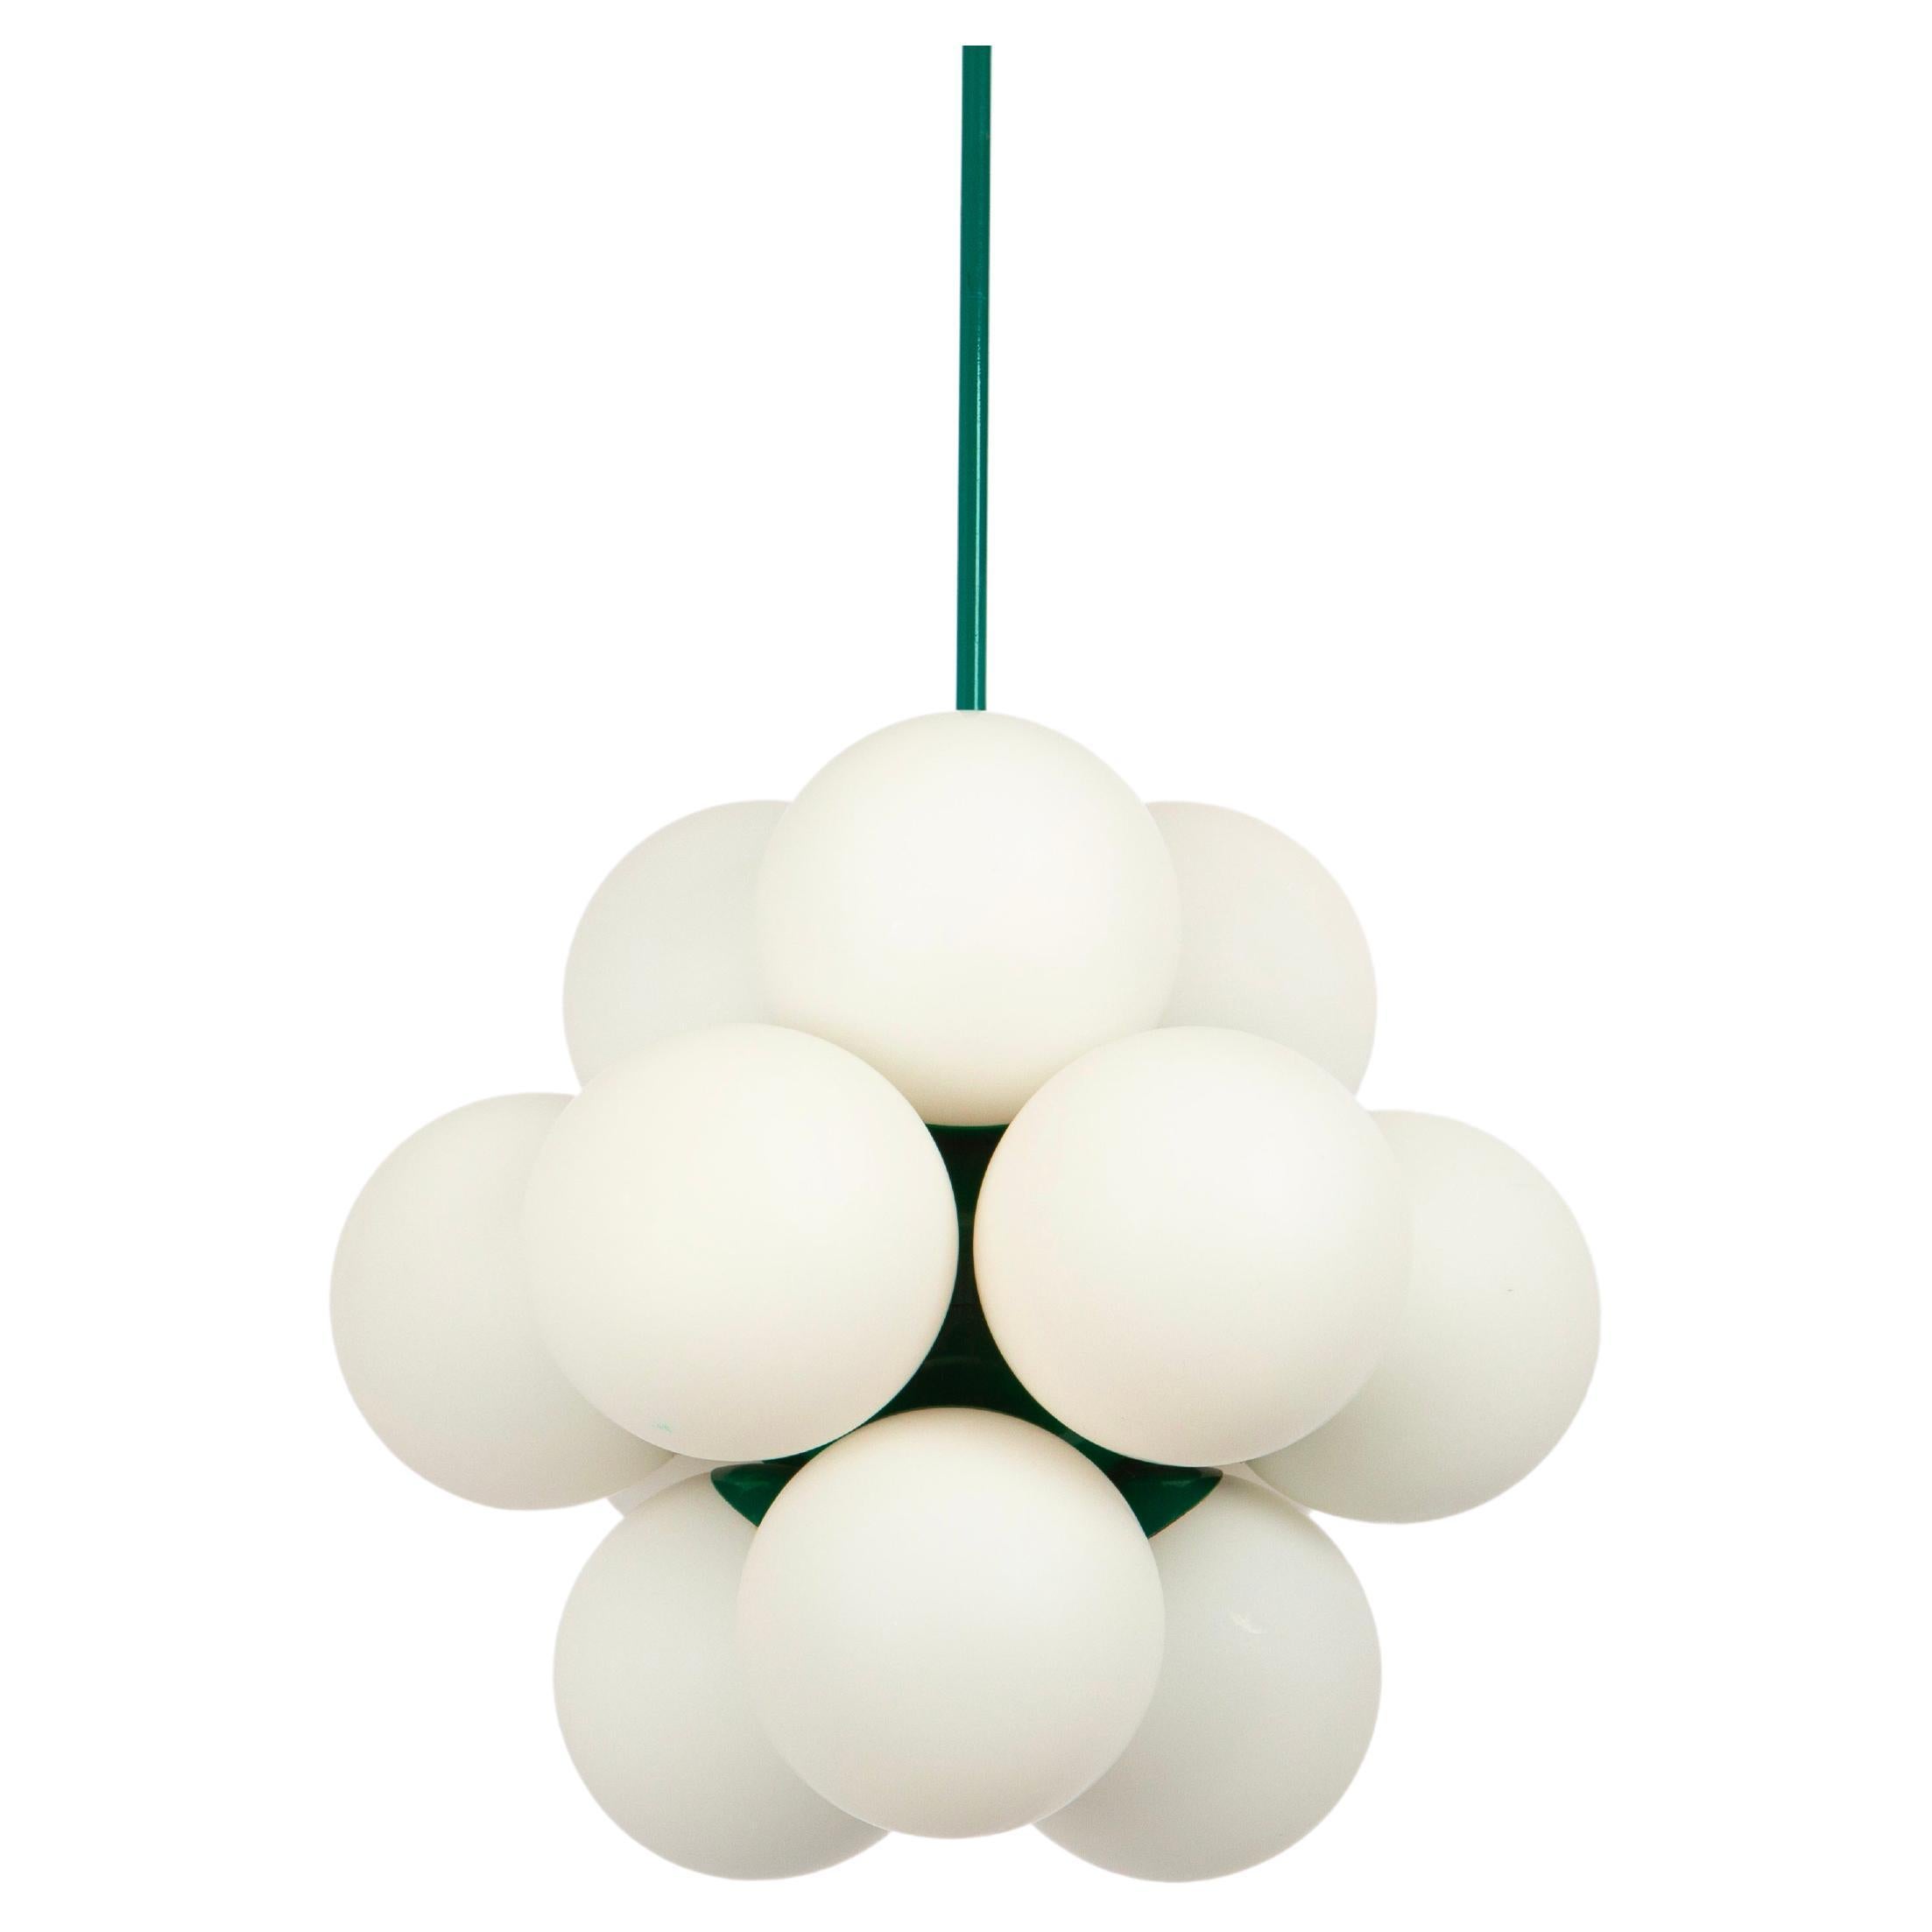 1 of 2 Wonderful Sputnik pendant light made by Kaiser Leuchten, Germany, circa 1970-1979.
Great Atomium-shaped chandelier with 12 opal glass pieces.
This exquisite lighting fixture boasts a captivating green hue that adds a touch of sophistication